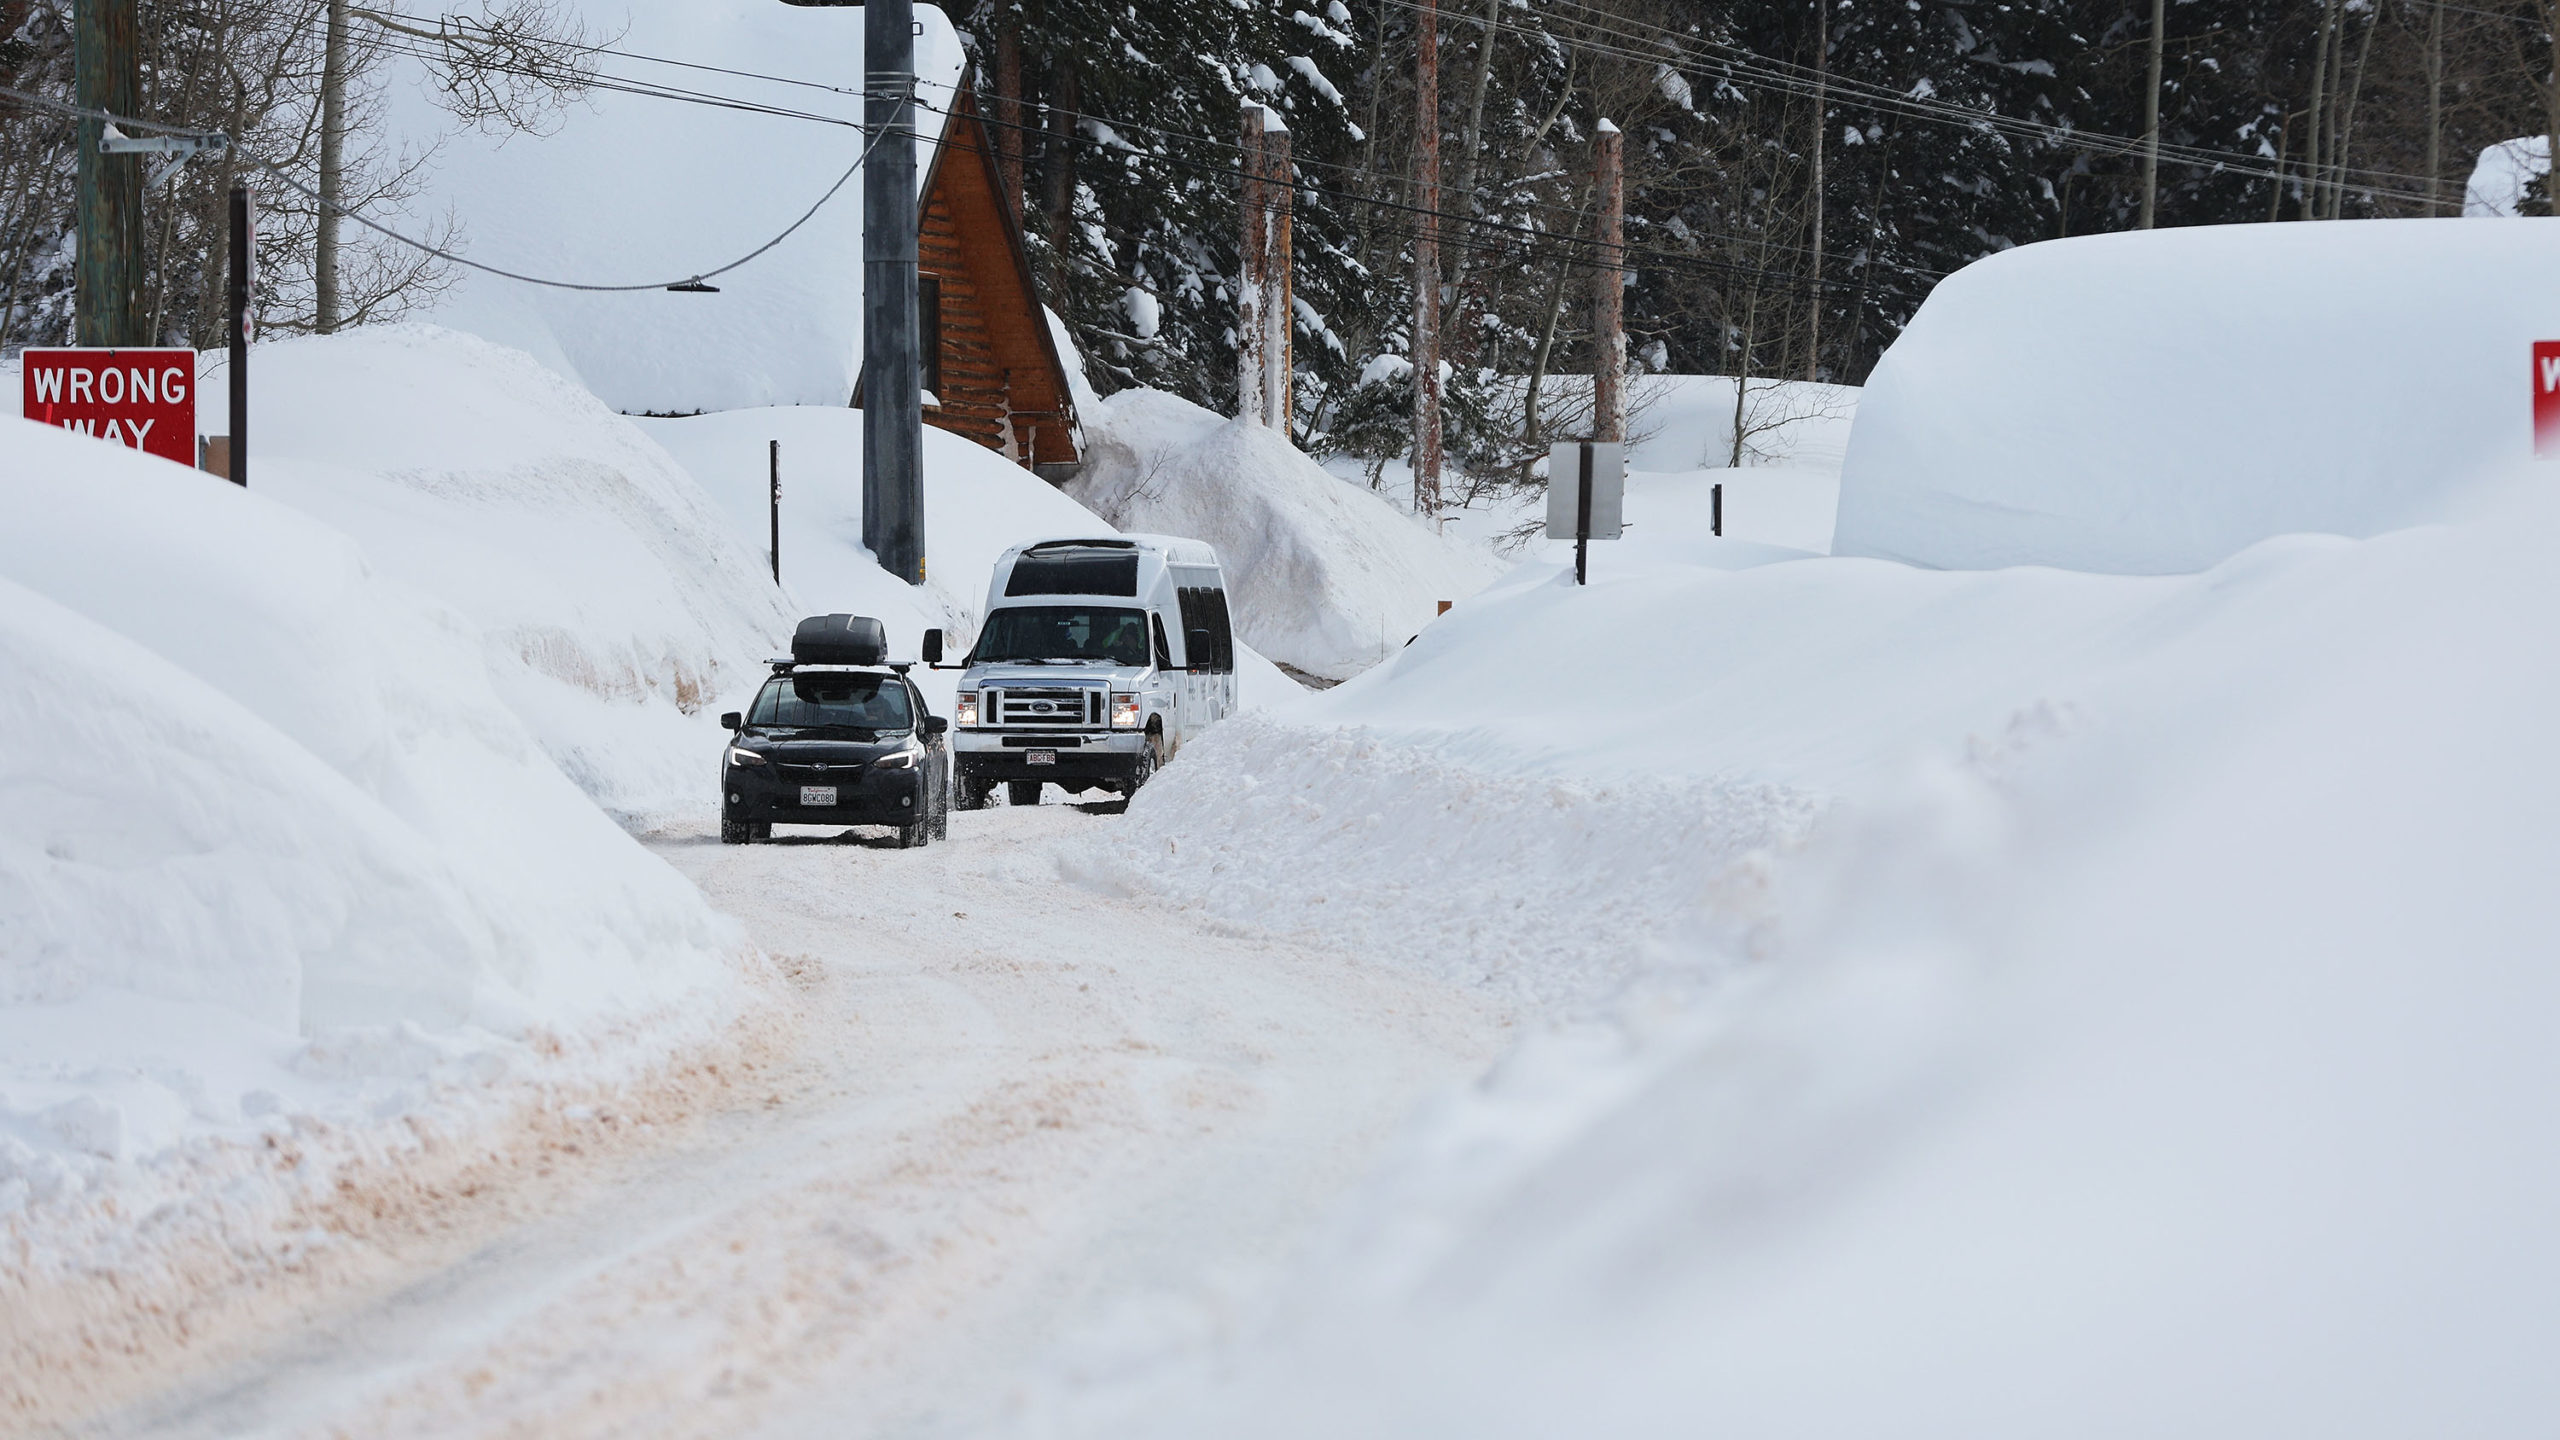 cars drive through piled up snow on road...